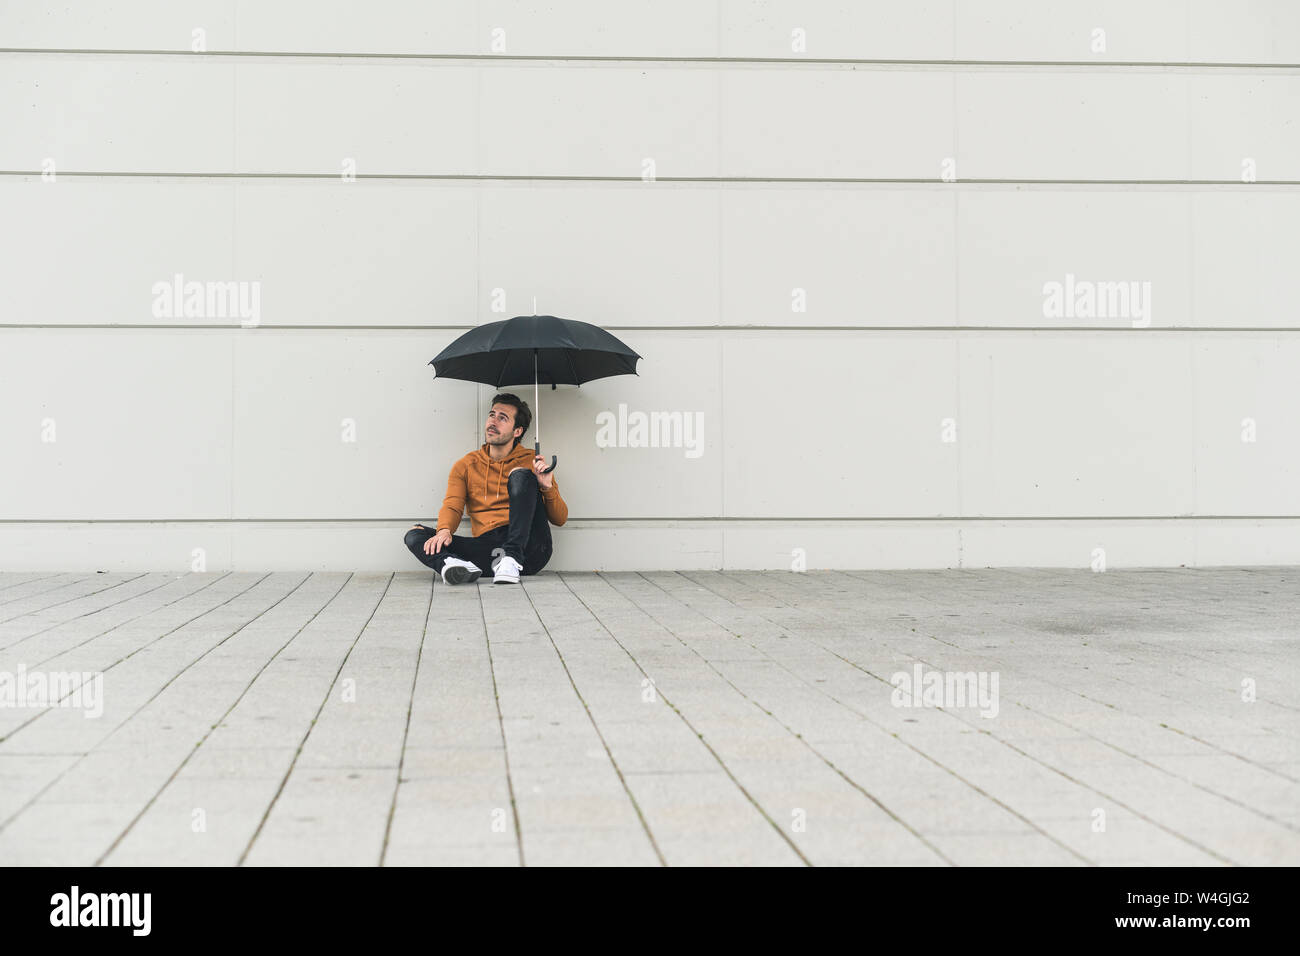 Young man with umbrella, sitting on ground, looking uncertain Stock Photo